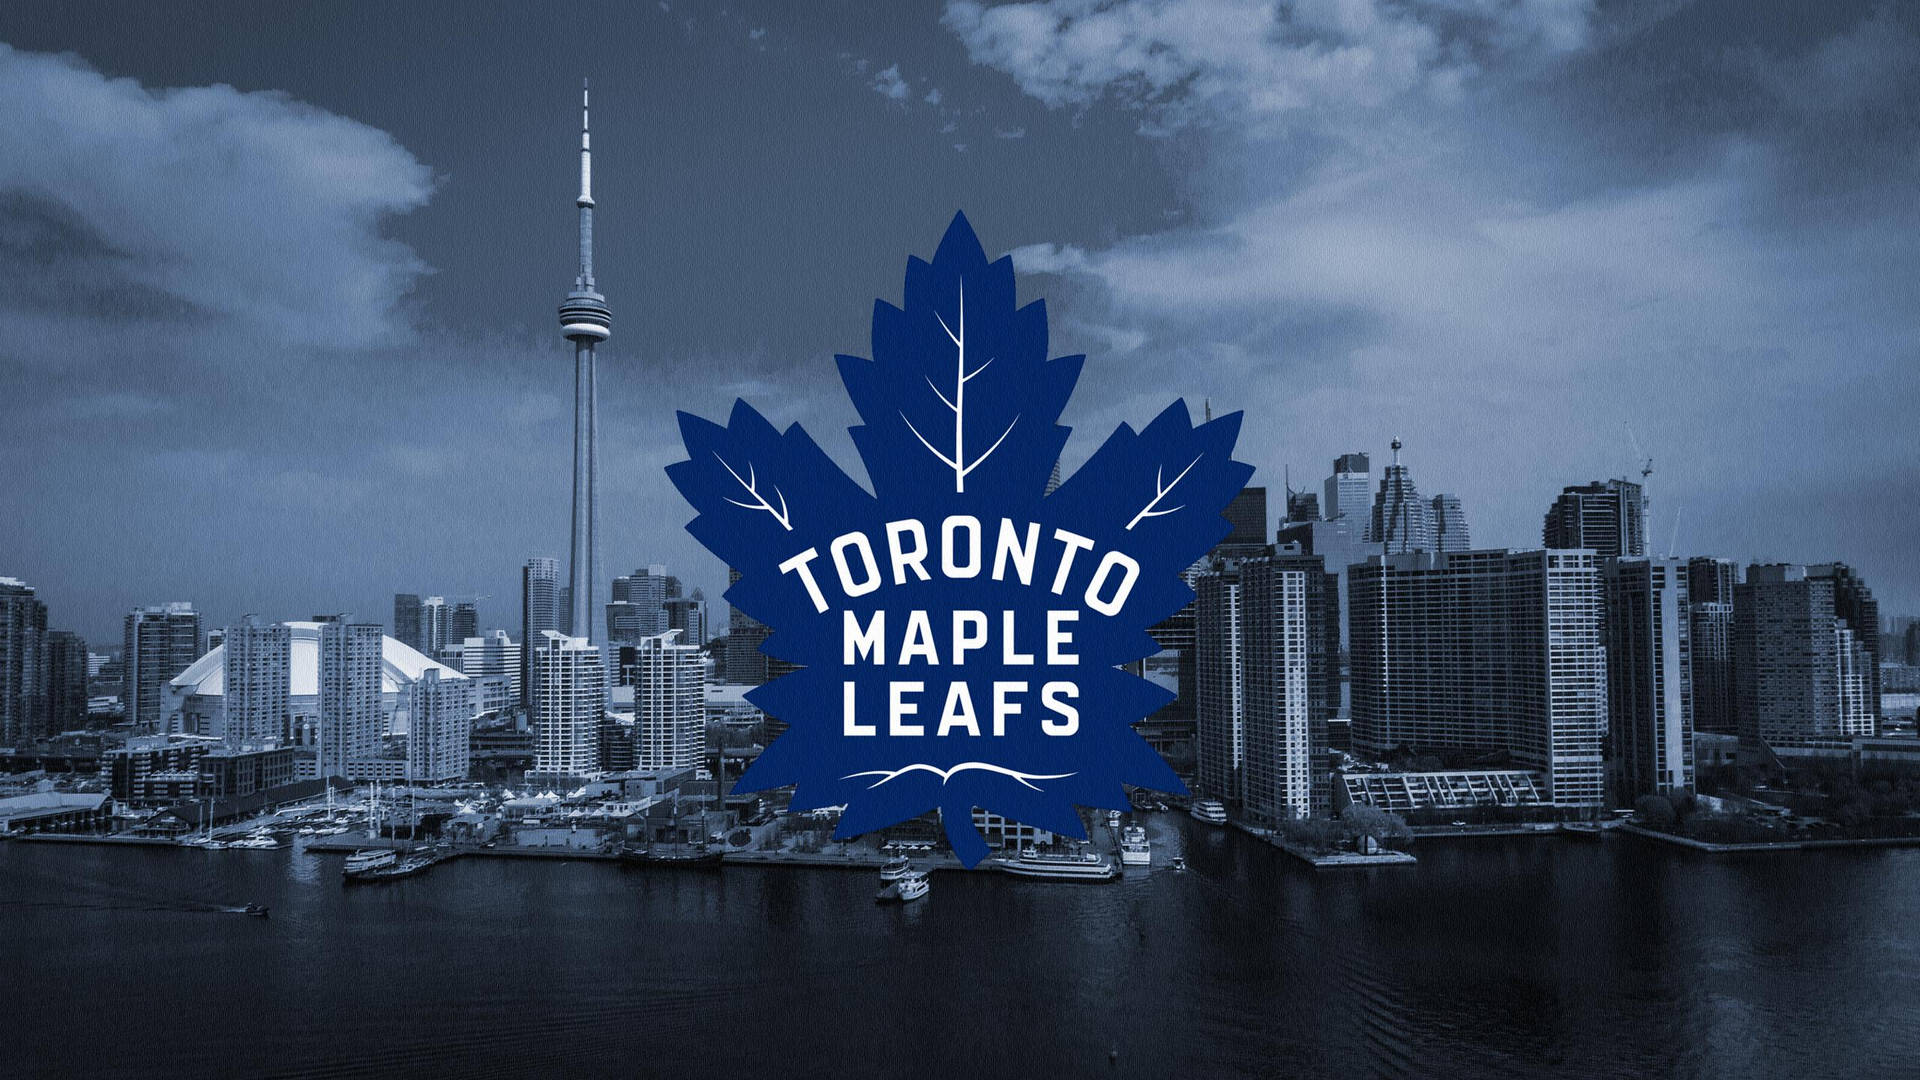 Iconic Toronto Maple Leafs Logo With Lakeside Buildings As Backdrop Background